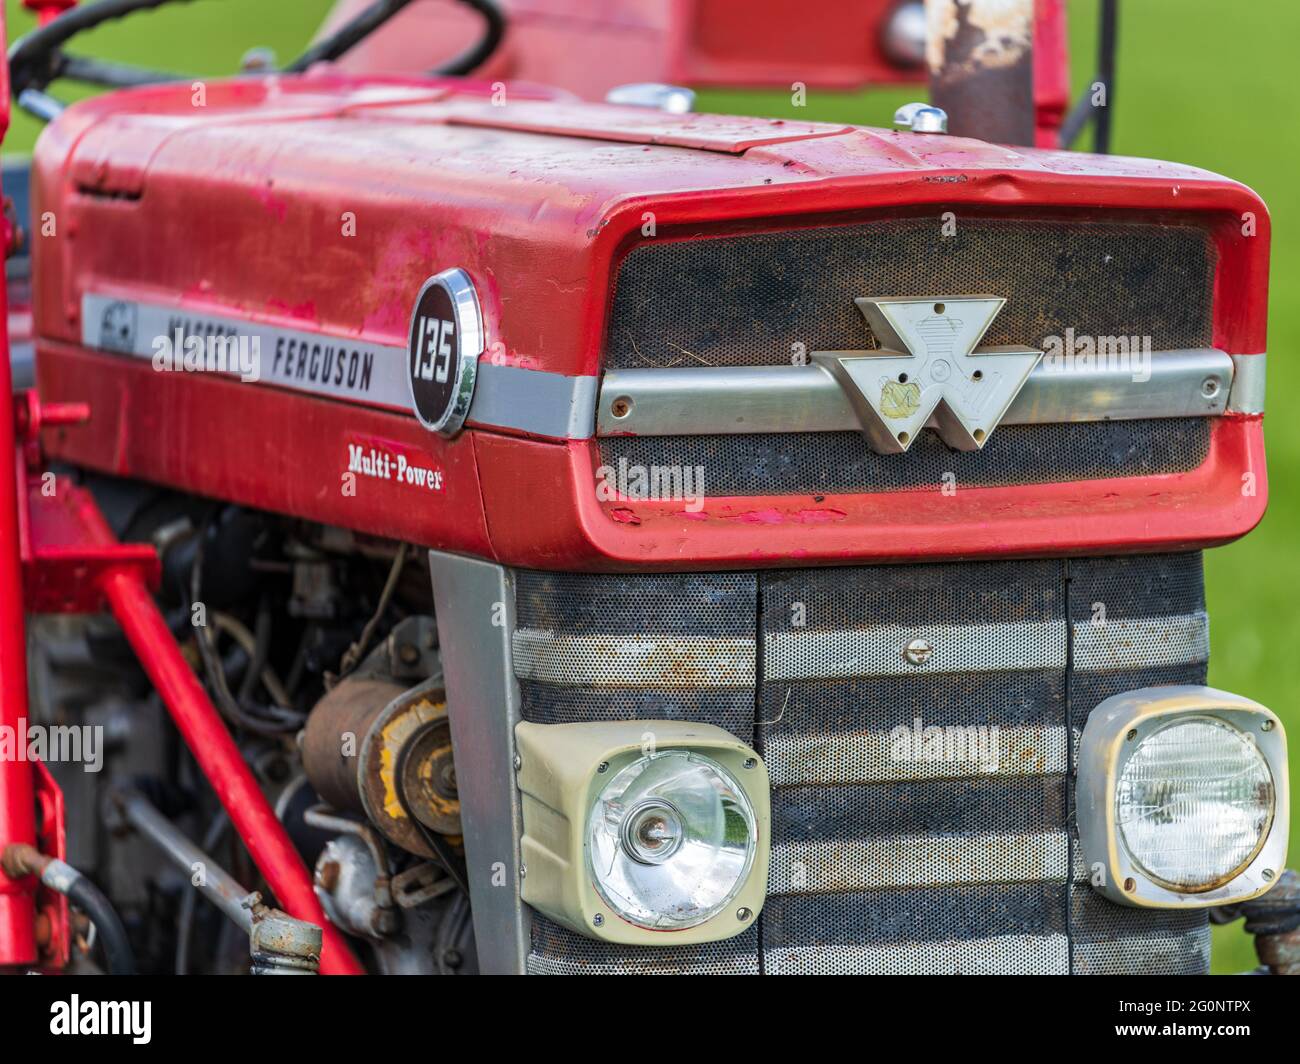 Massey Ferguson 135 Tractor detail - Produced between 1964 and 1975 it was one of the most popular tractors of the era. Stock Photo